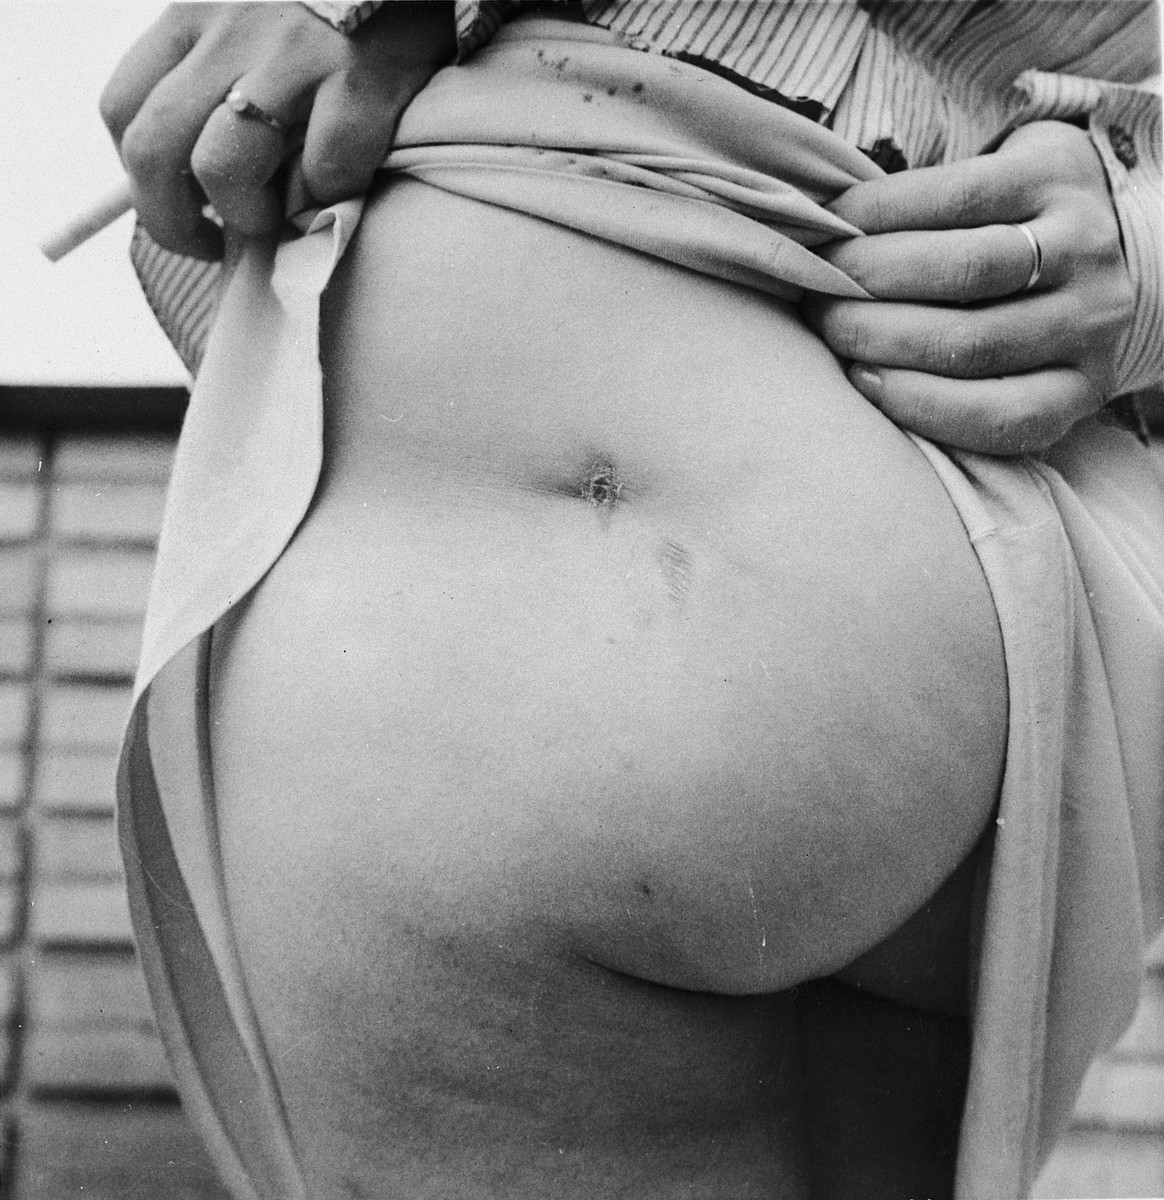 Madame Pacquet displays scars that she received as the result of torture in the Breendonck internment camp.